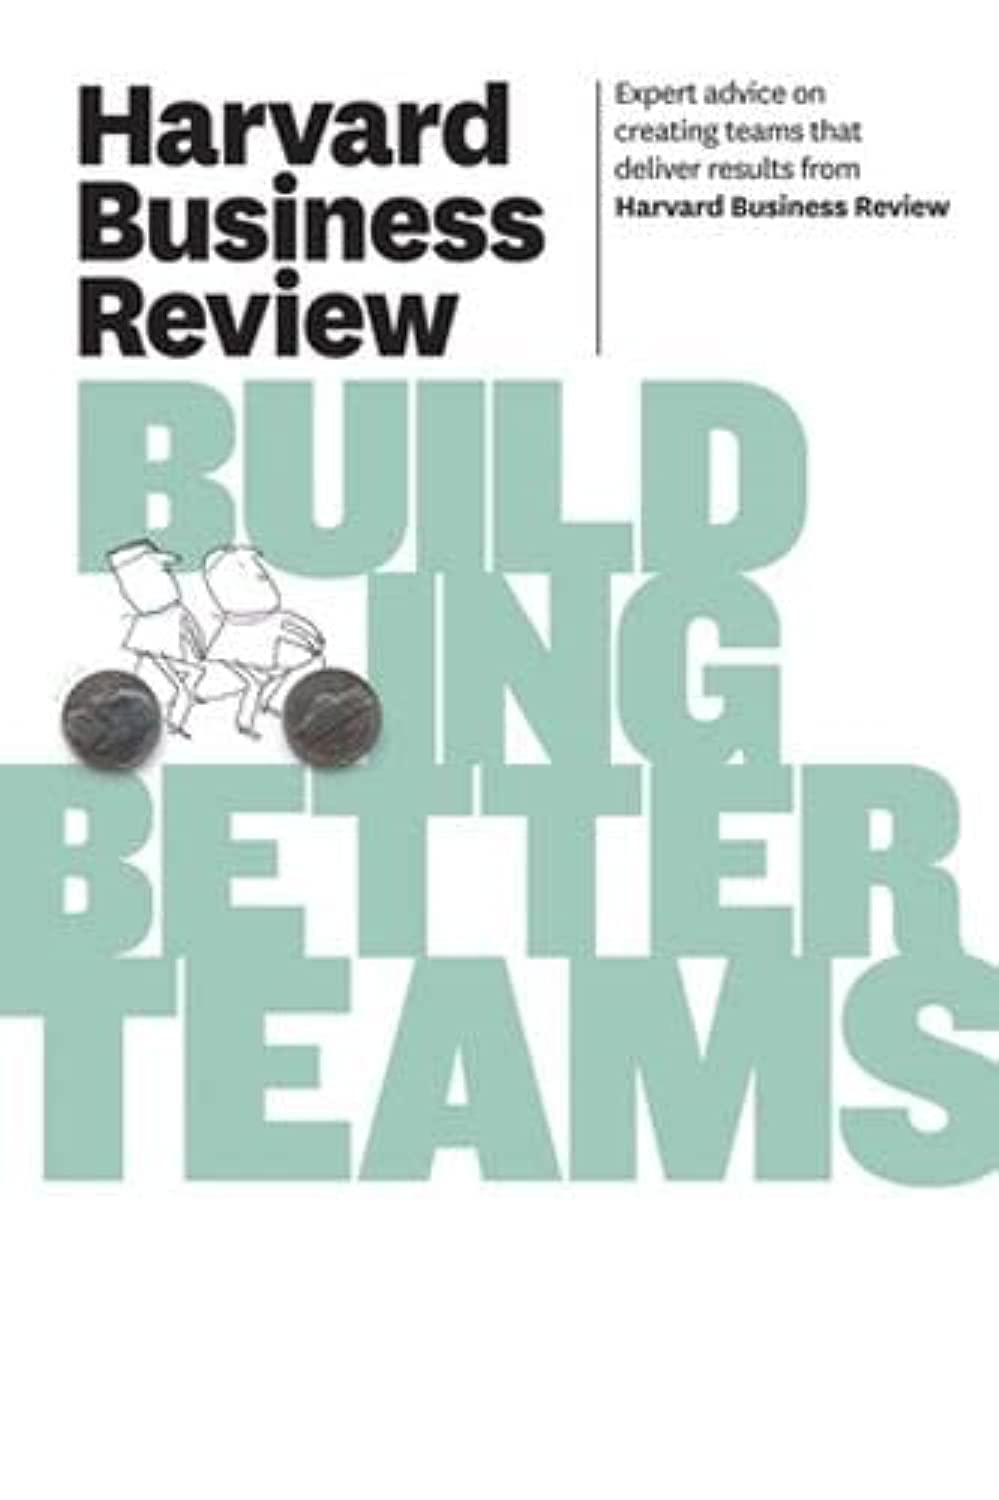 Harvard-Business-Review-on-Building-Better-Teams